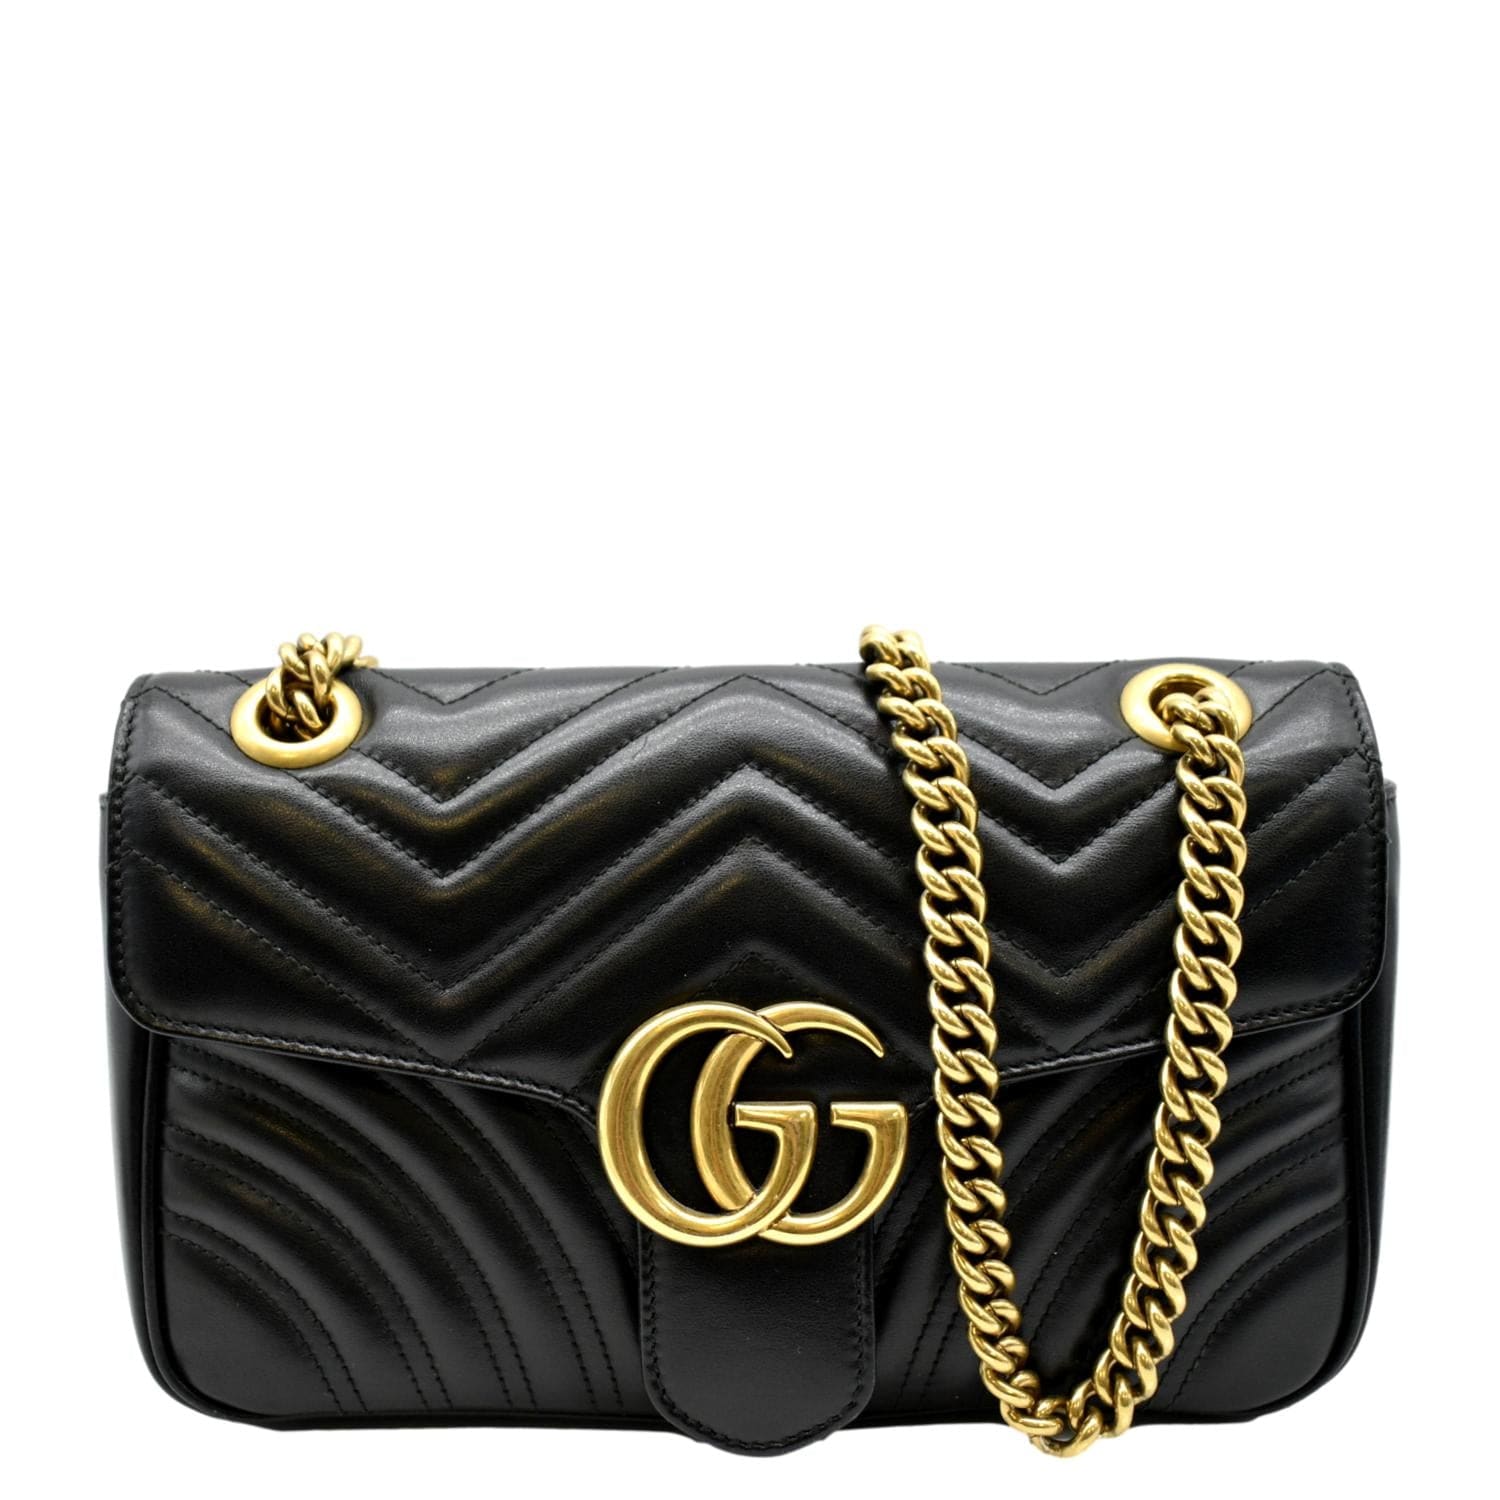 Sold Gucci Marmont 26 cm Used Like New